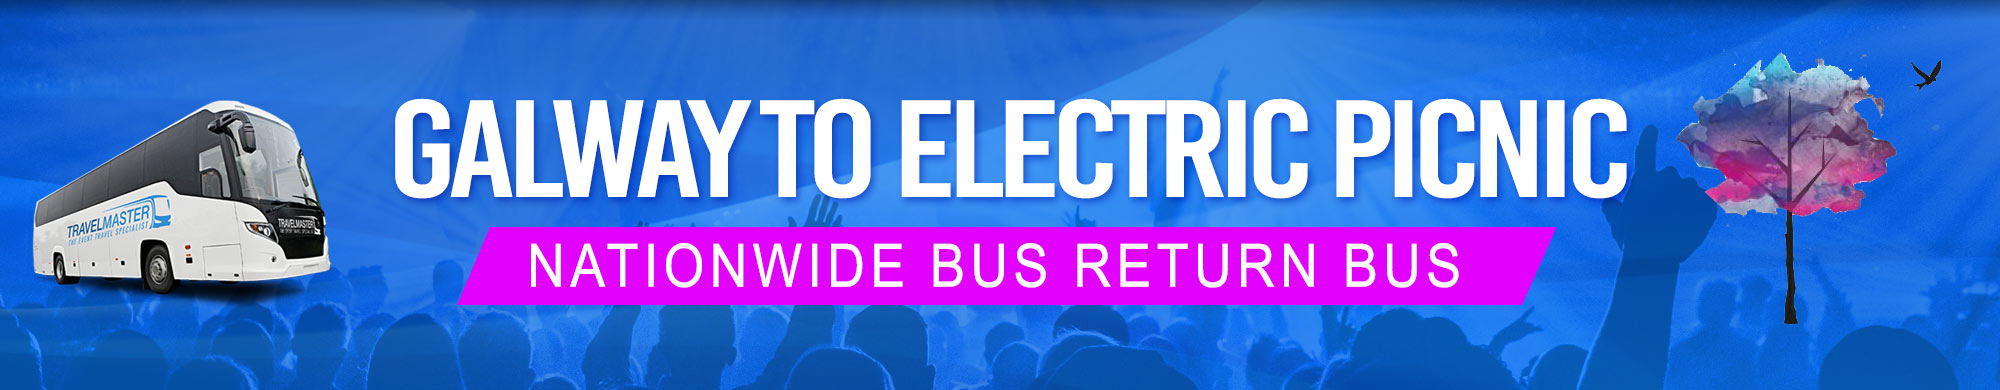 Bus to Electric Picnic From Galway